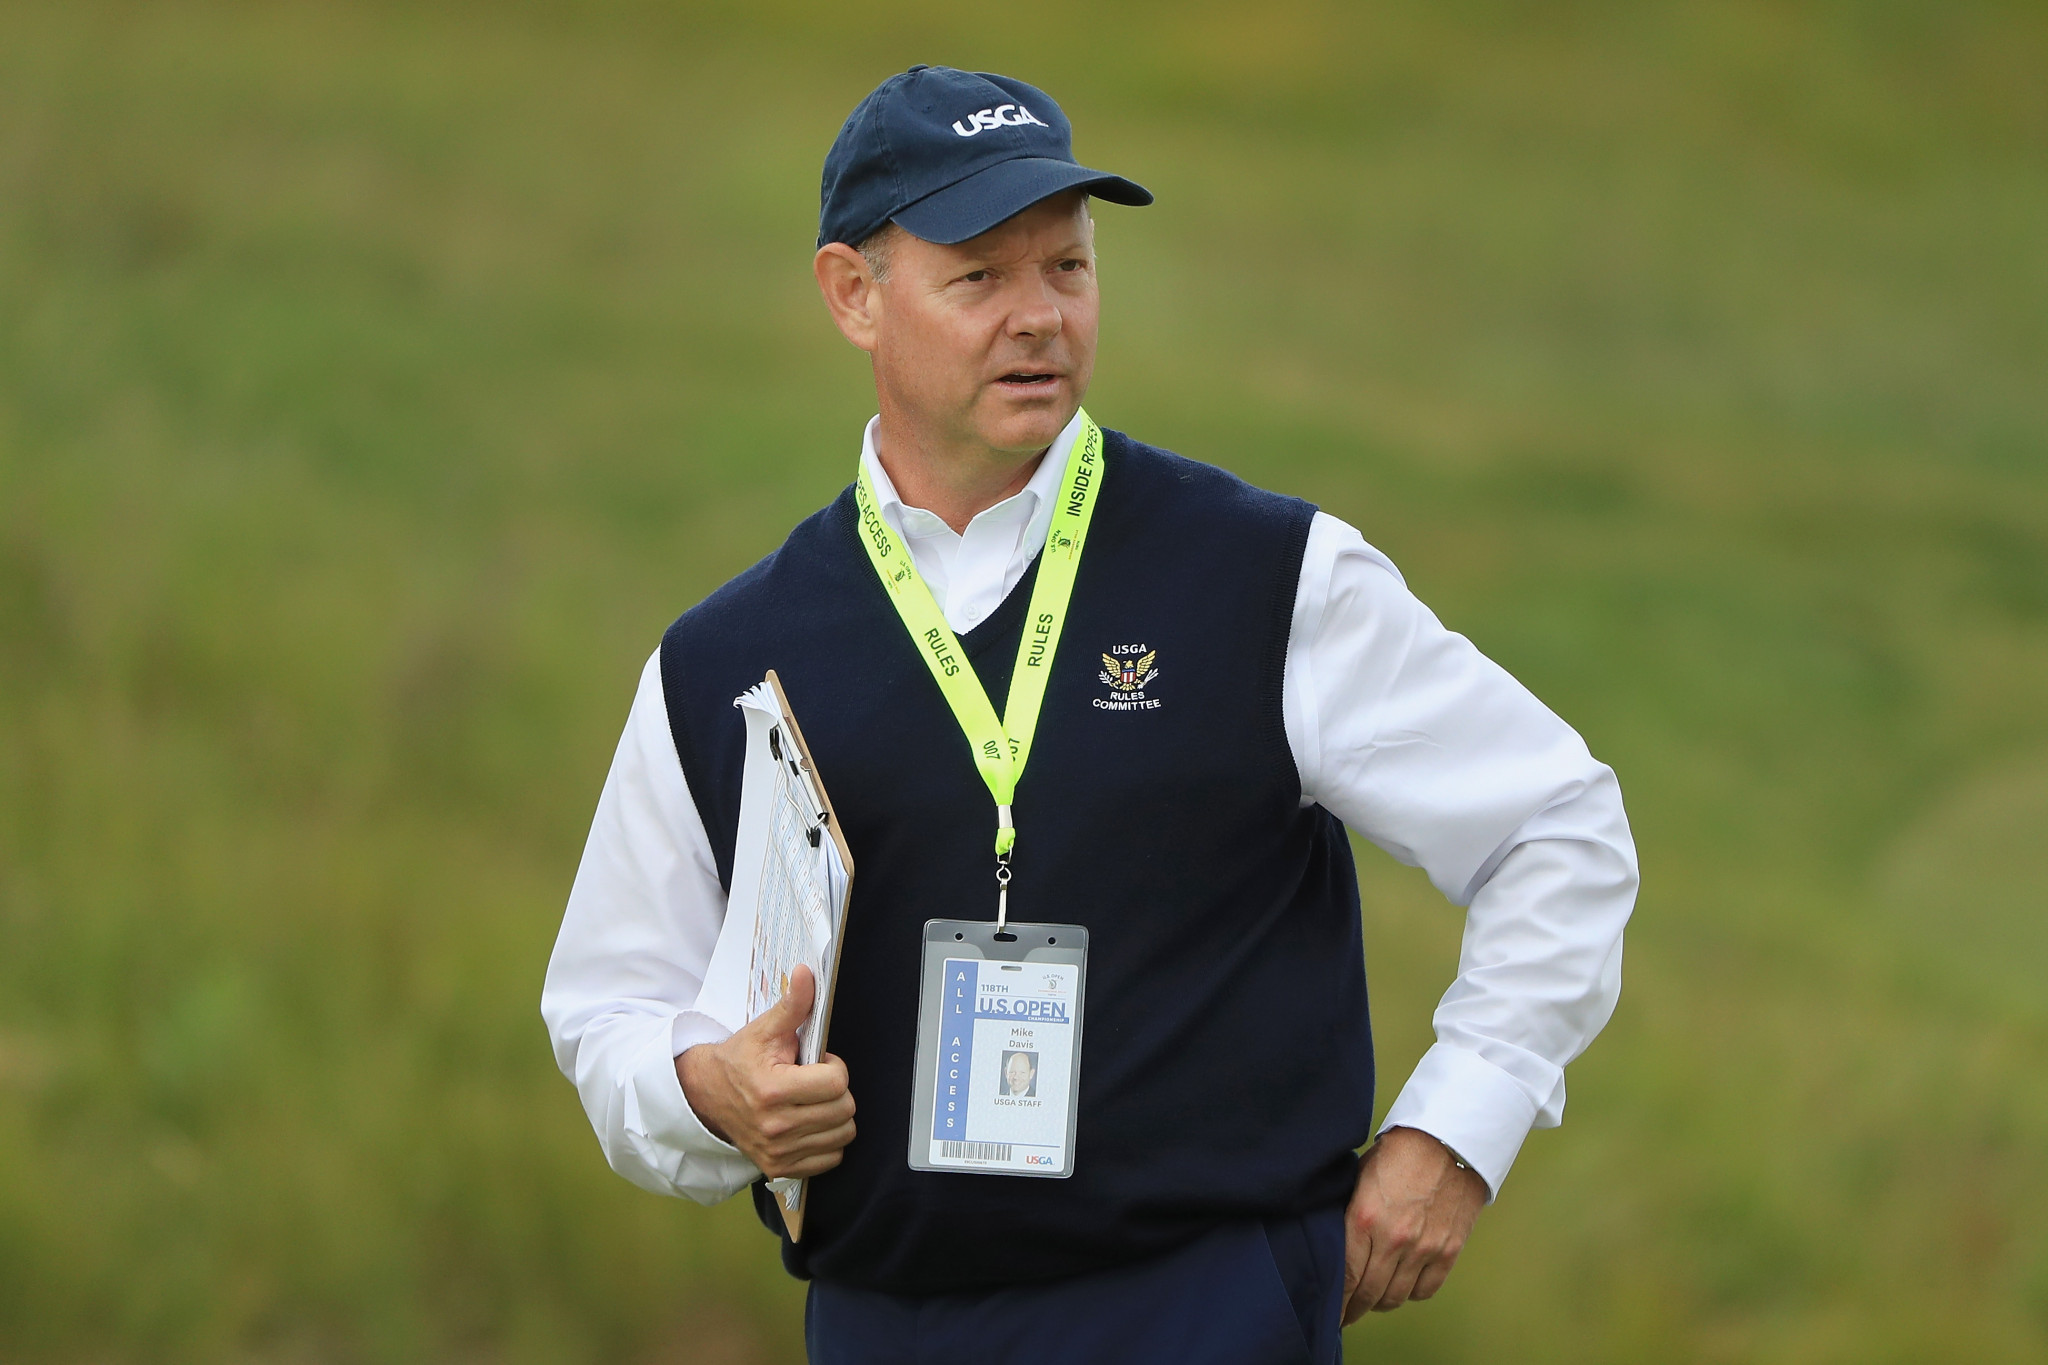 Mike Davis is set to pursue his passion for golf course design after leaving the United States Golf Association ©Getty Images